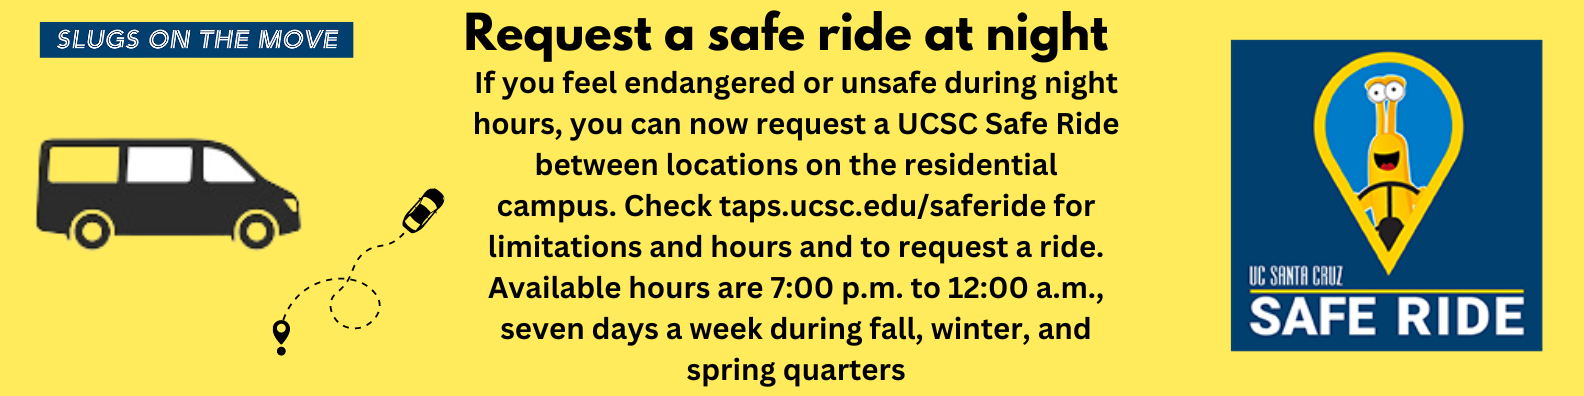 Request a Safe Ride at Night If you feel endangered or unsafe during night hours, you can now request a UCSC Safe Ride between locations on the residential campus. Check taps.ucsc.edu/saferide for limitations and to request a ride. This service is NOT intended to replace existing transportation services or walking in groups.